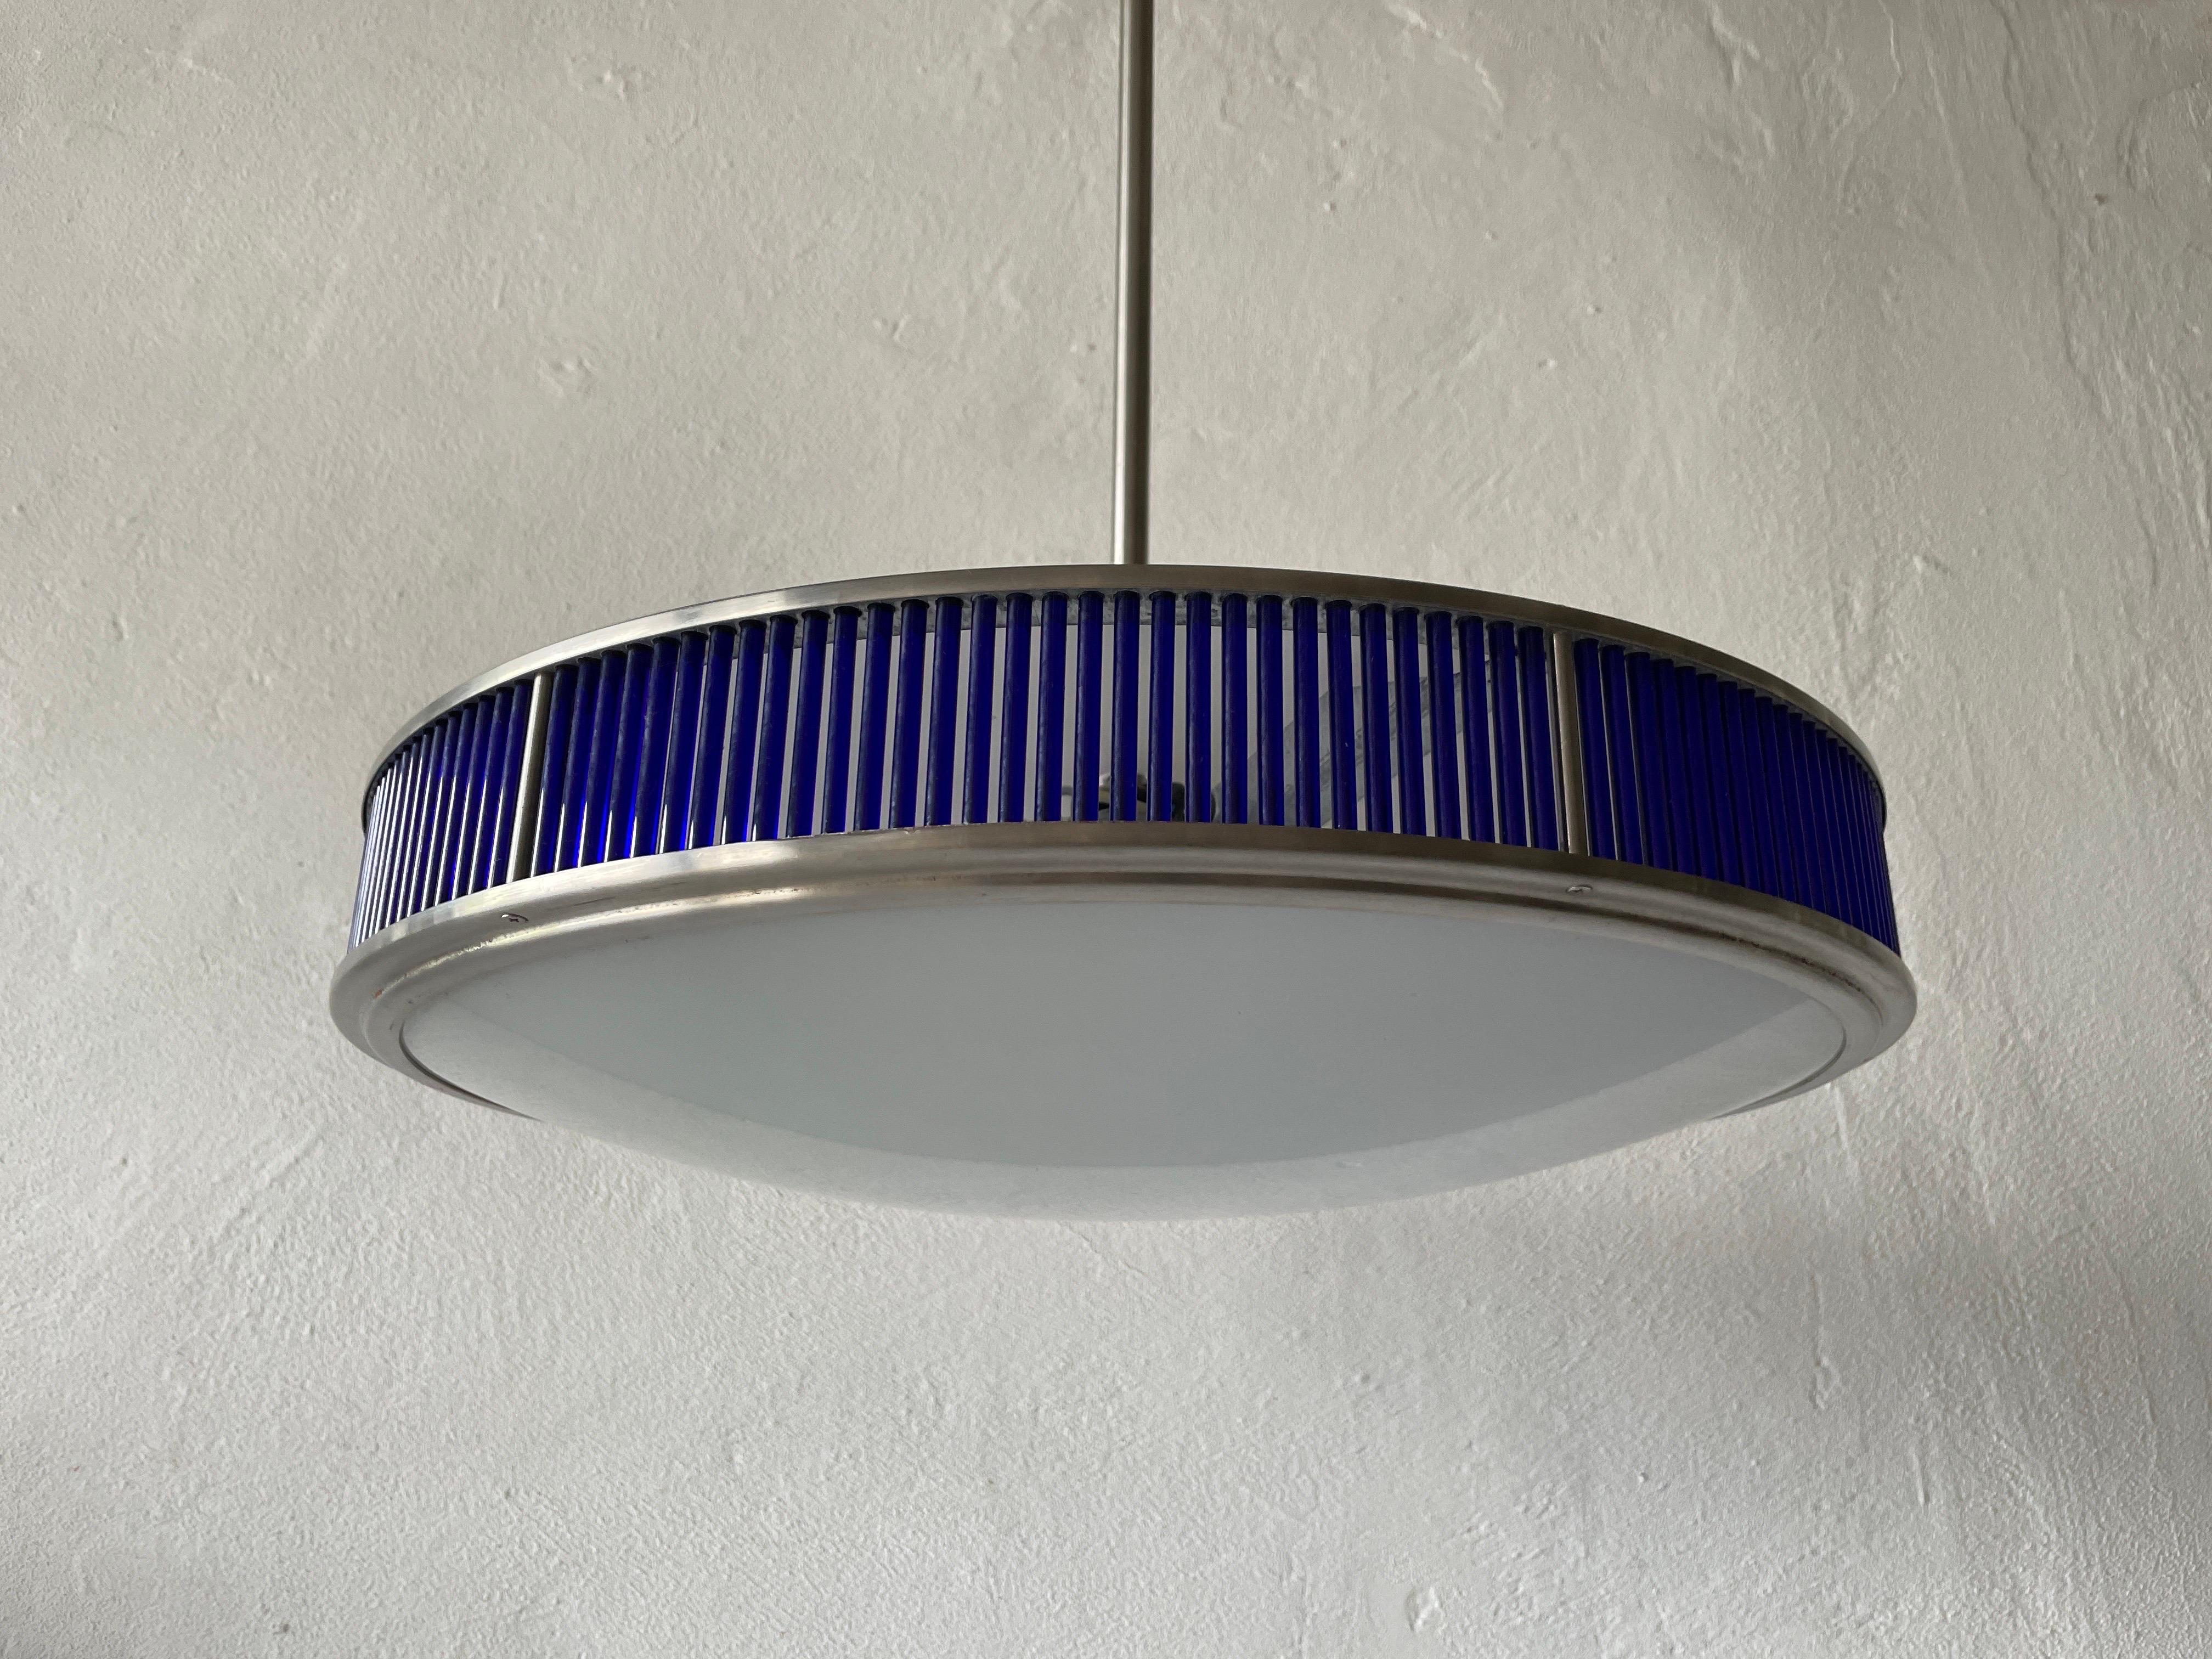 Ufo Design glass & blue plexiglass large ceiling lamp by Gunther Lambert, Germany, 1970s

Lampshade is in good condition and very clean. 
This lamp works with 3x E27 light bulb. 
Wired and suitable to use with 220V and 110V for all